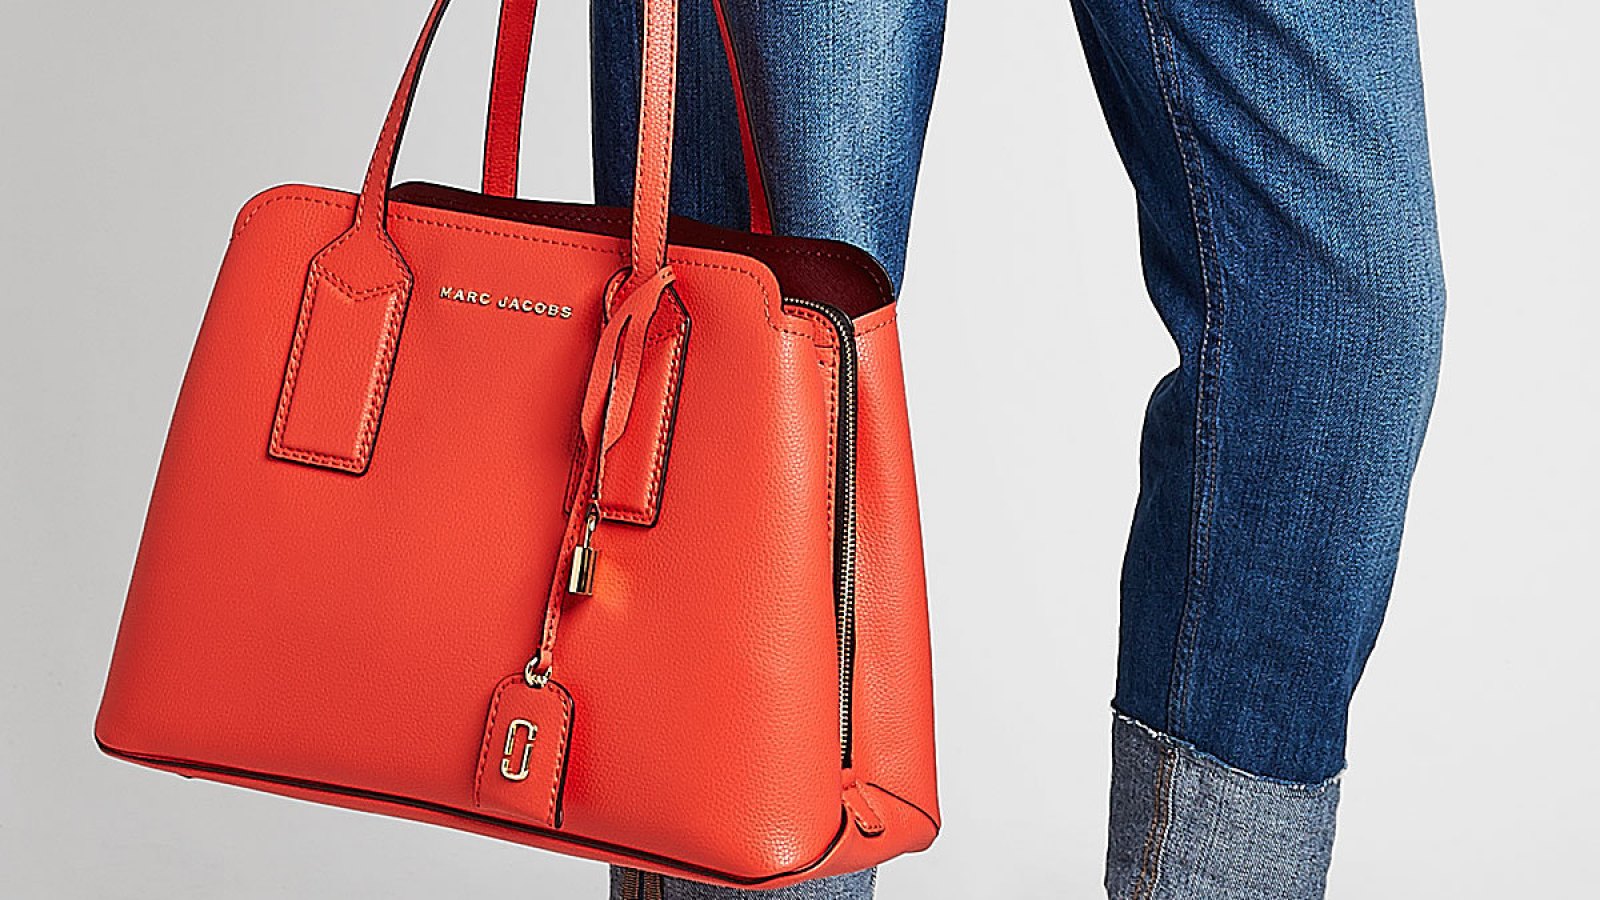 Act Fast: The Iconic Marc Jacobs Tote Bag Is $40 Off During